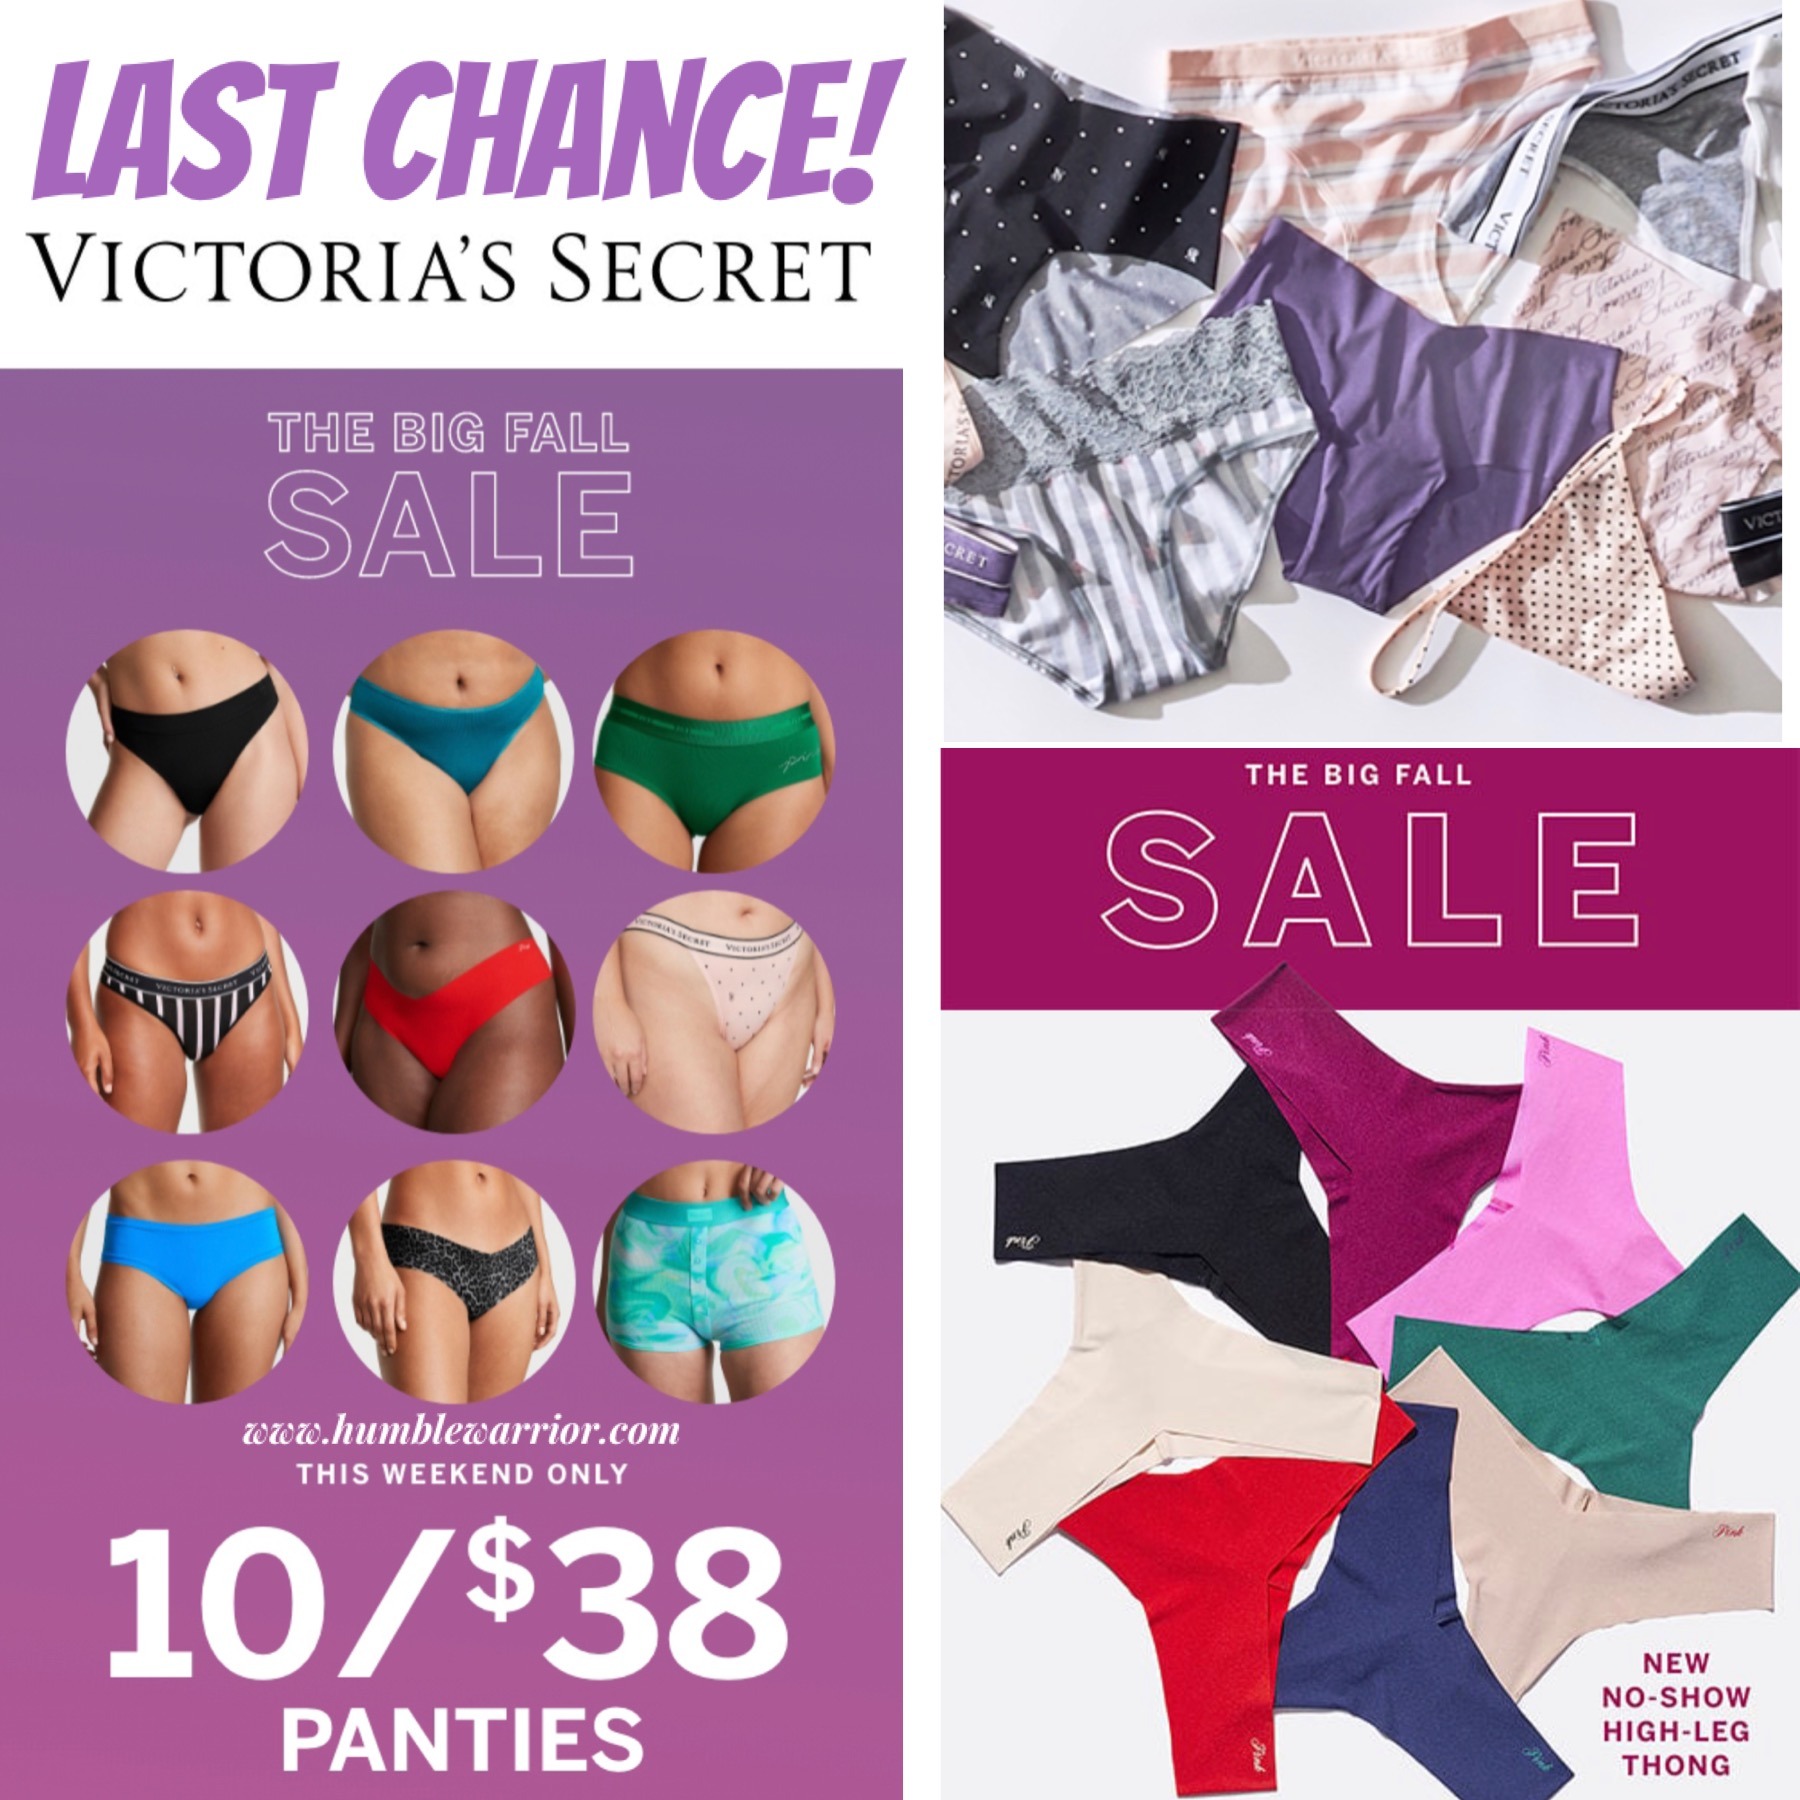 THE BIG FALL SALE AT VS/PINK ENDS SOON! - Home of The Humble Warrior